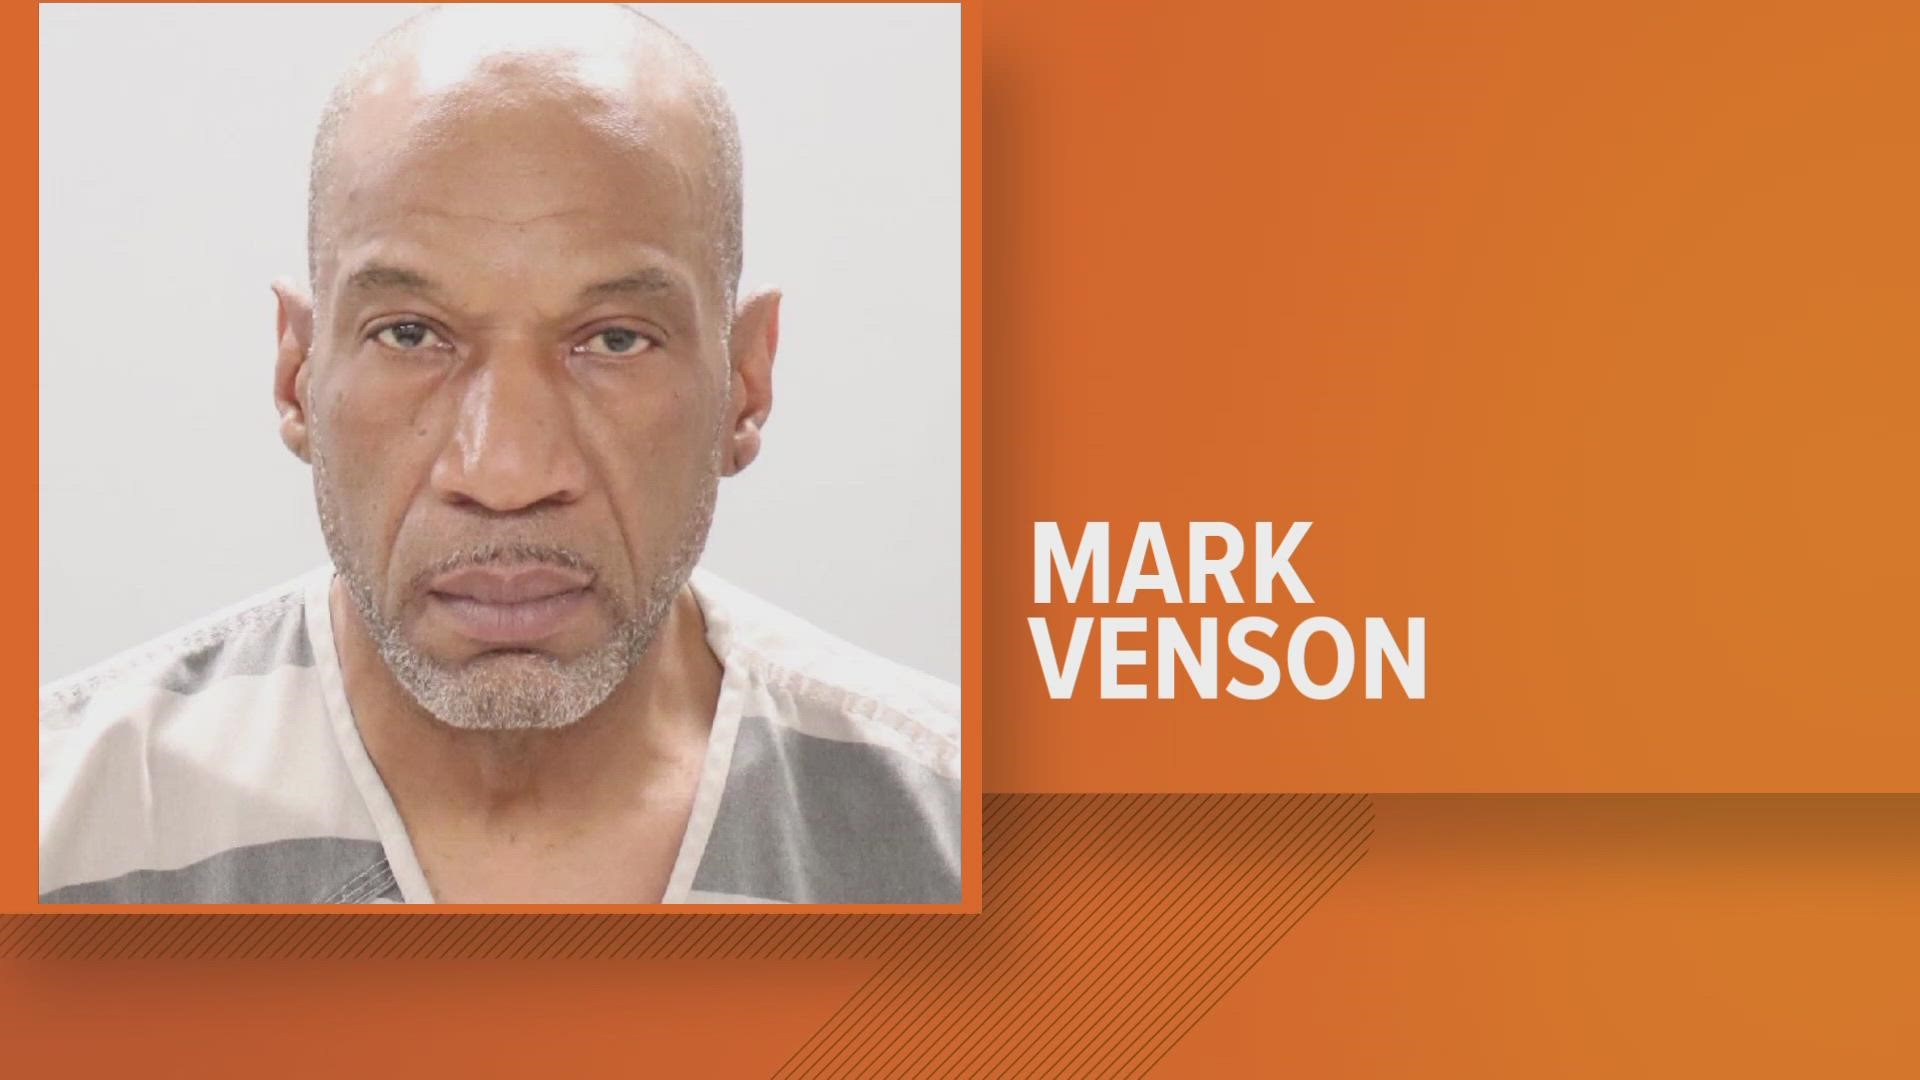 The Knoxville Police Department said Mark Venson stabbed a 47-year-old during a physical altercation.